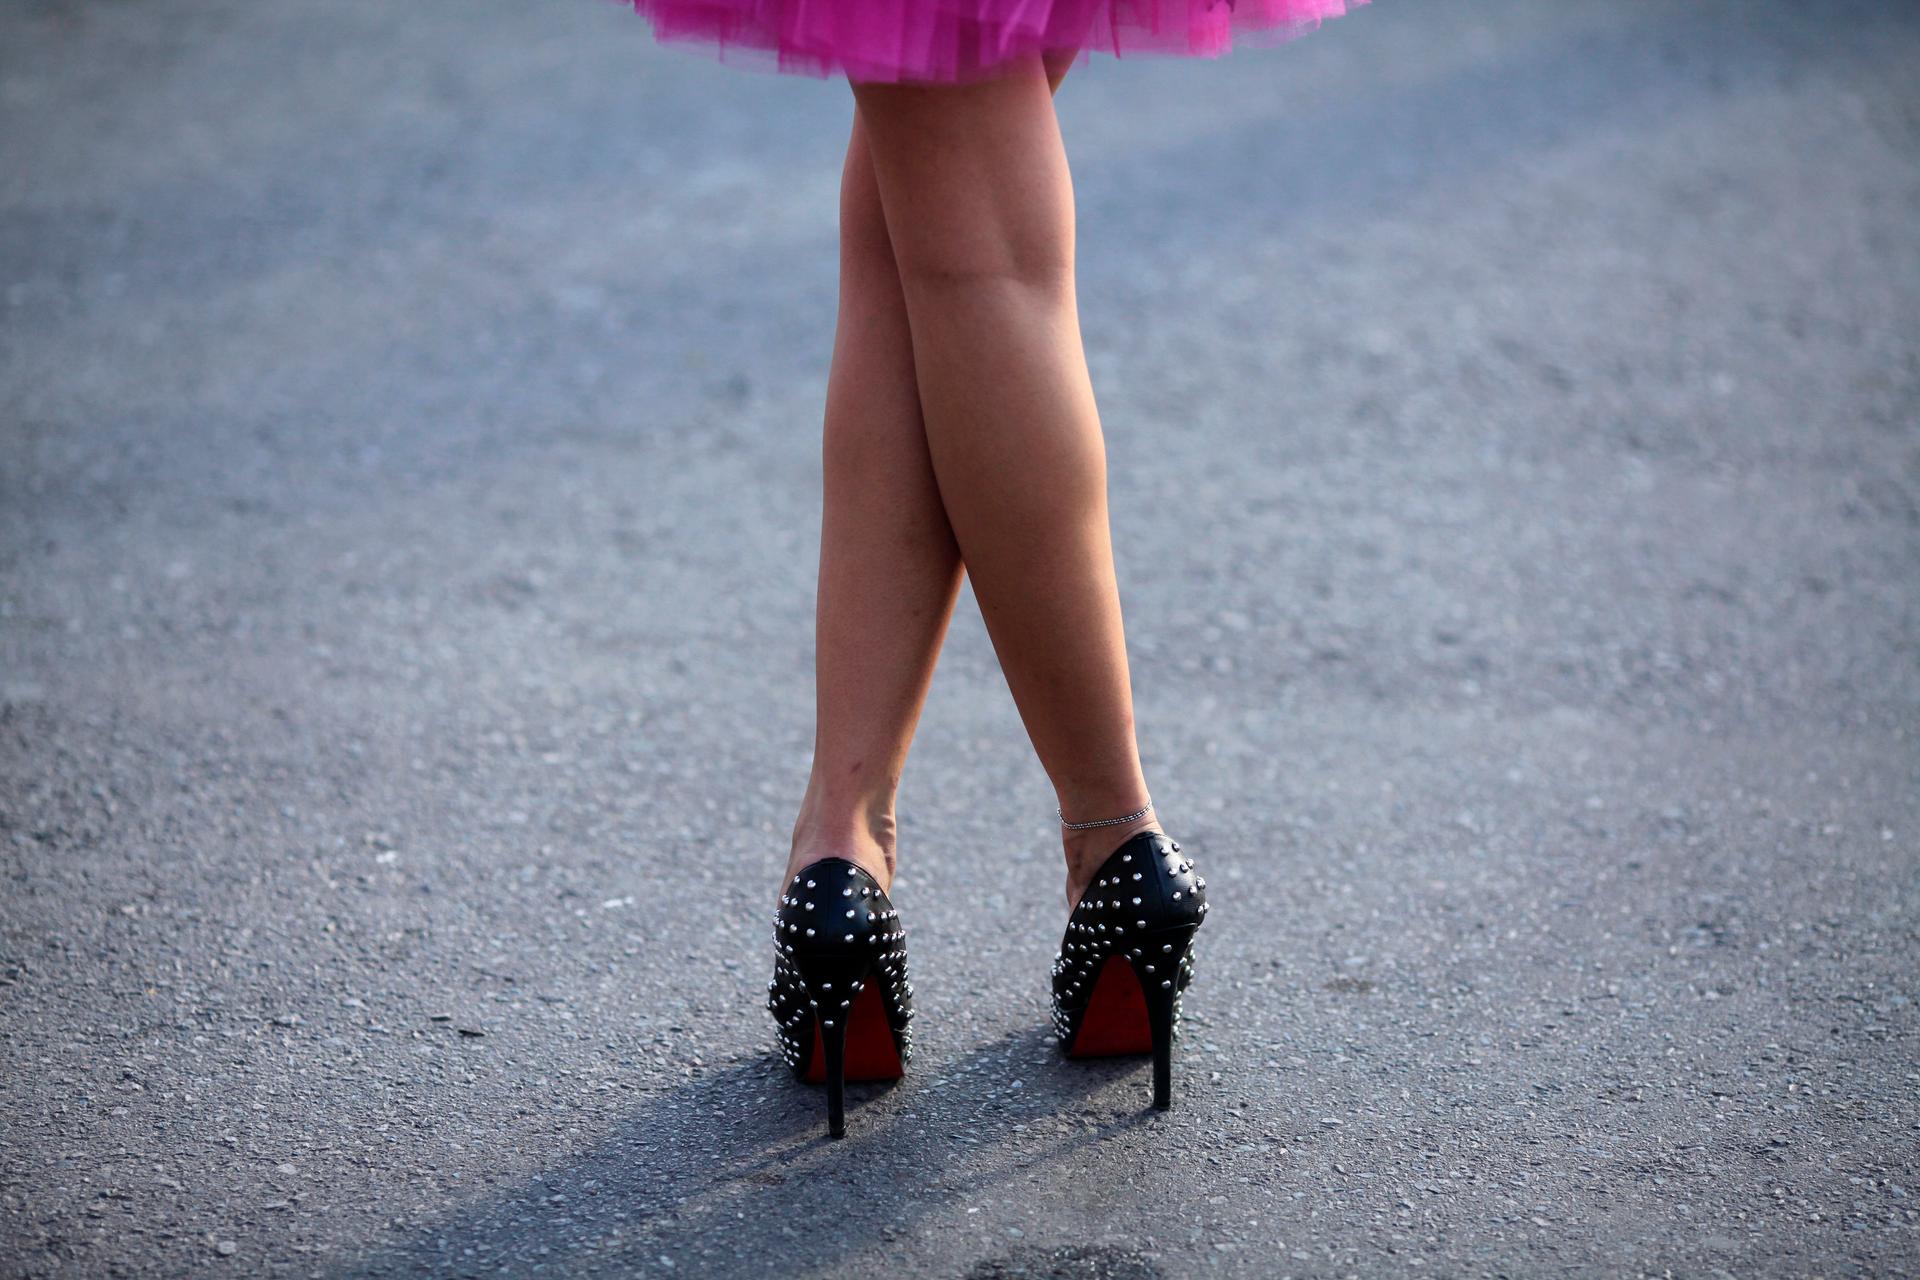 A hostess waits for participants at the Stiletto Run in Constanta, 155 miles east of Bucharest